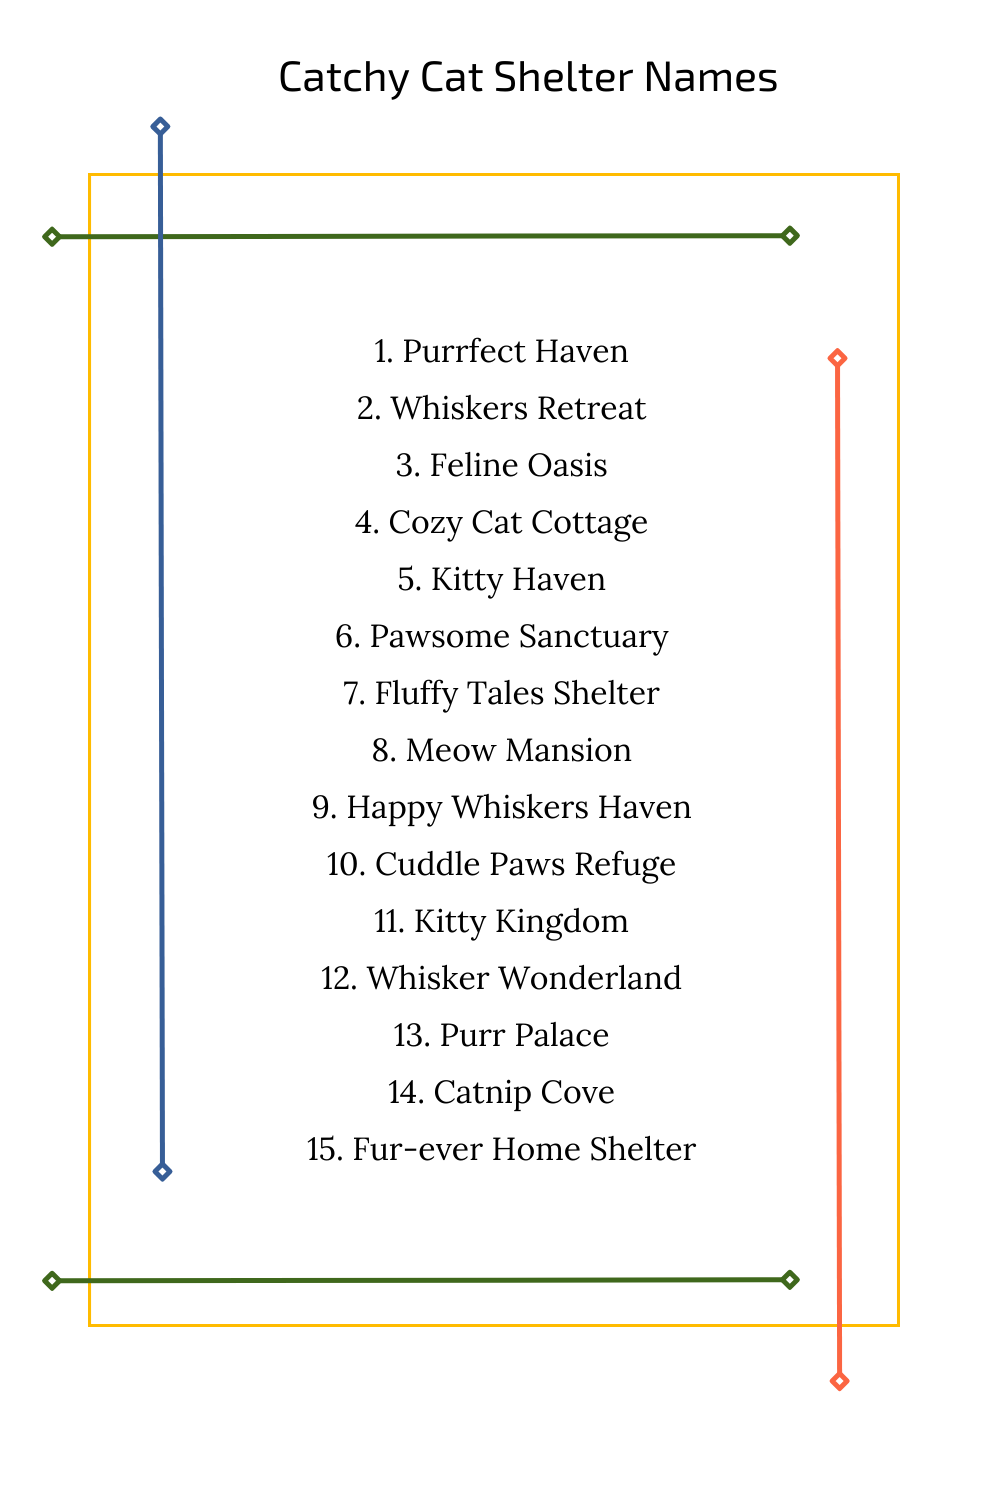 Catchy Cat Shelter Names